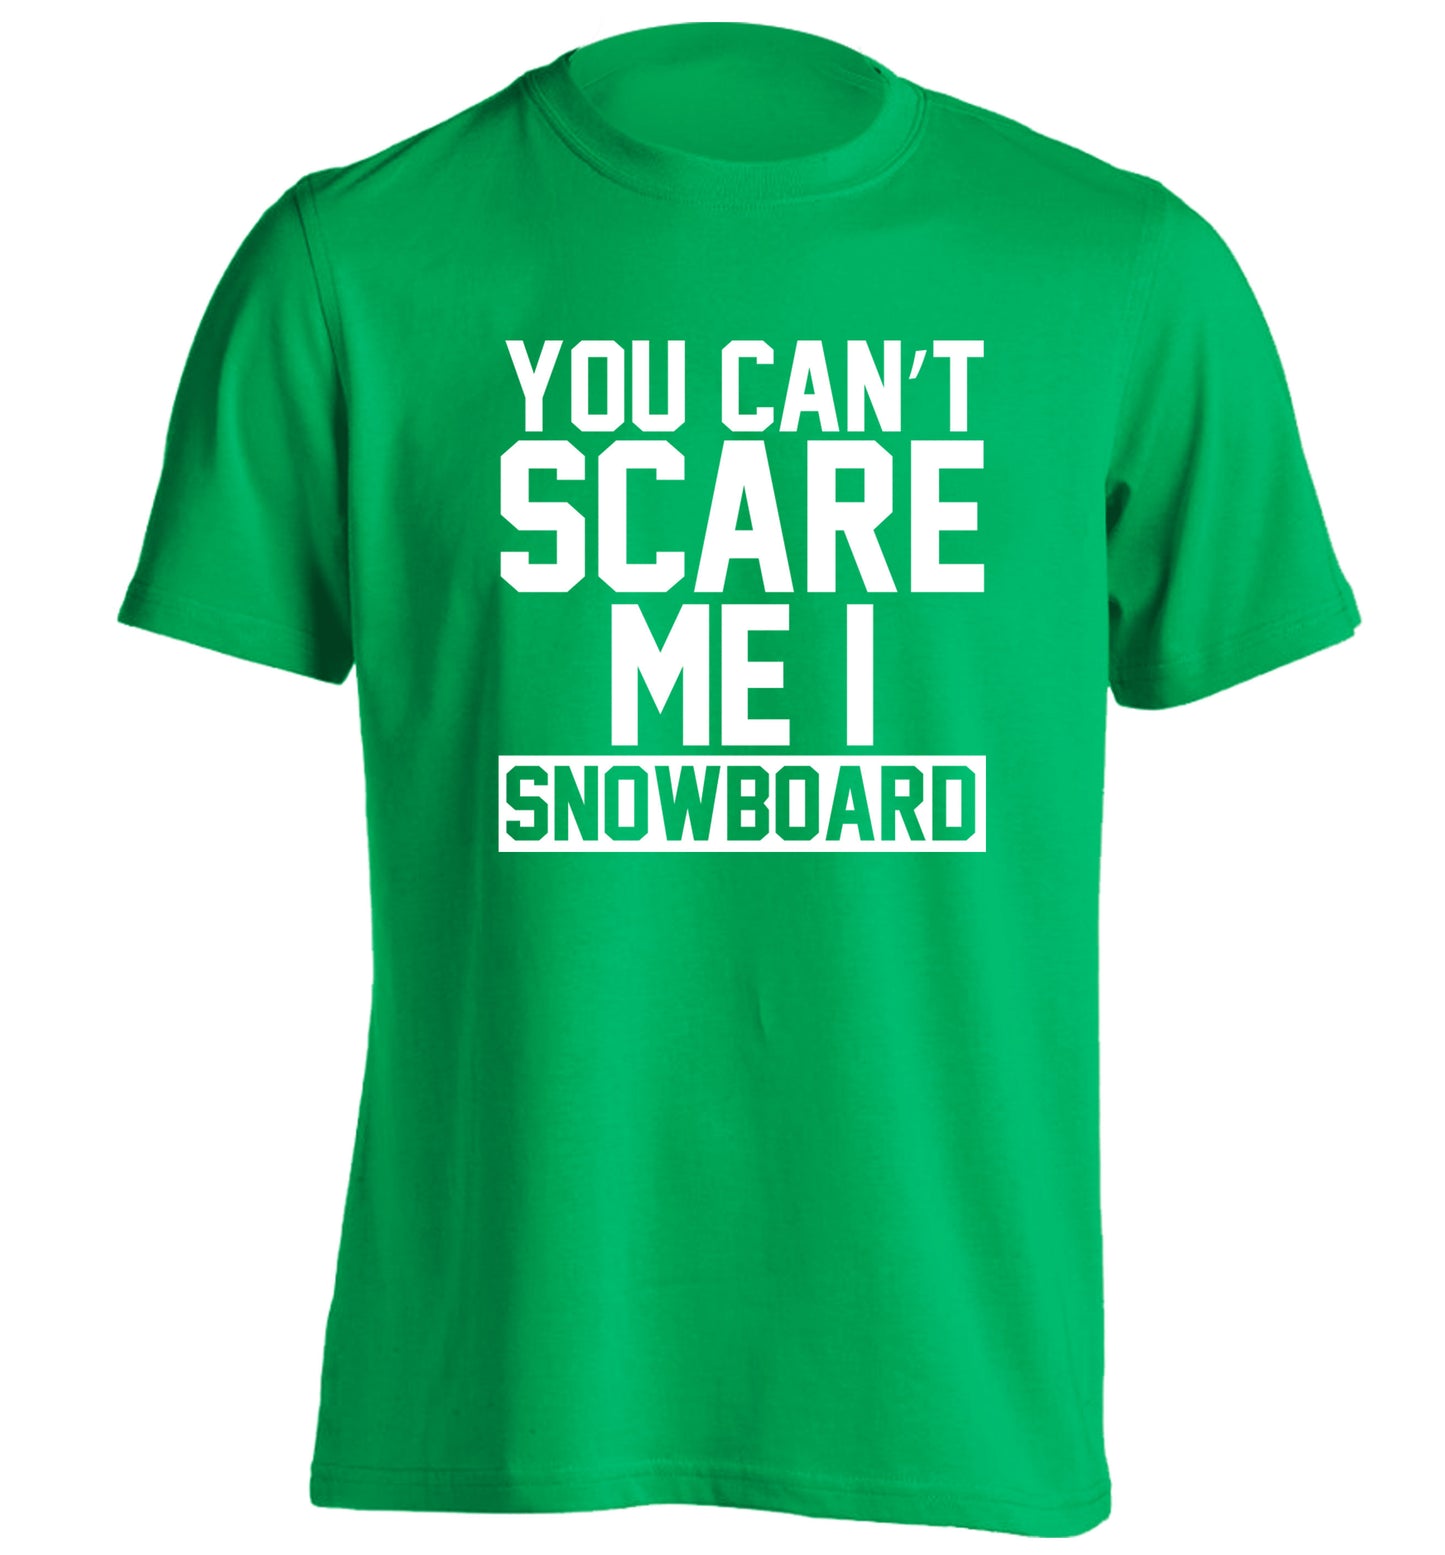 You can't scare me I snowboard adults unisex green Tshirt 2XL